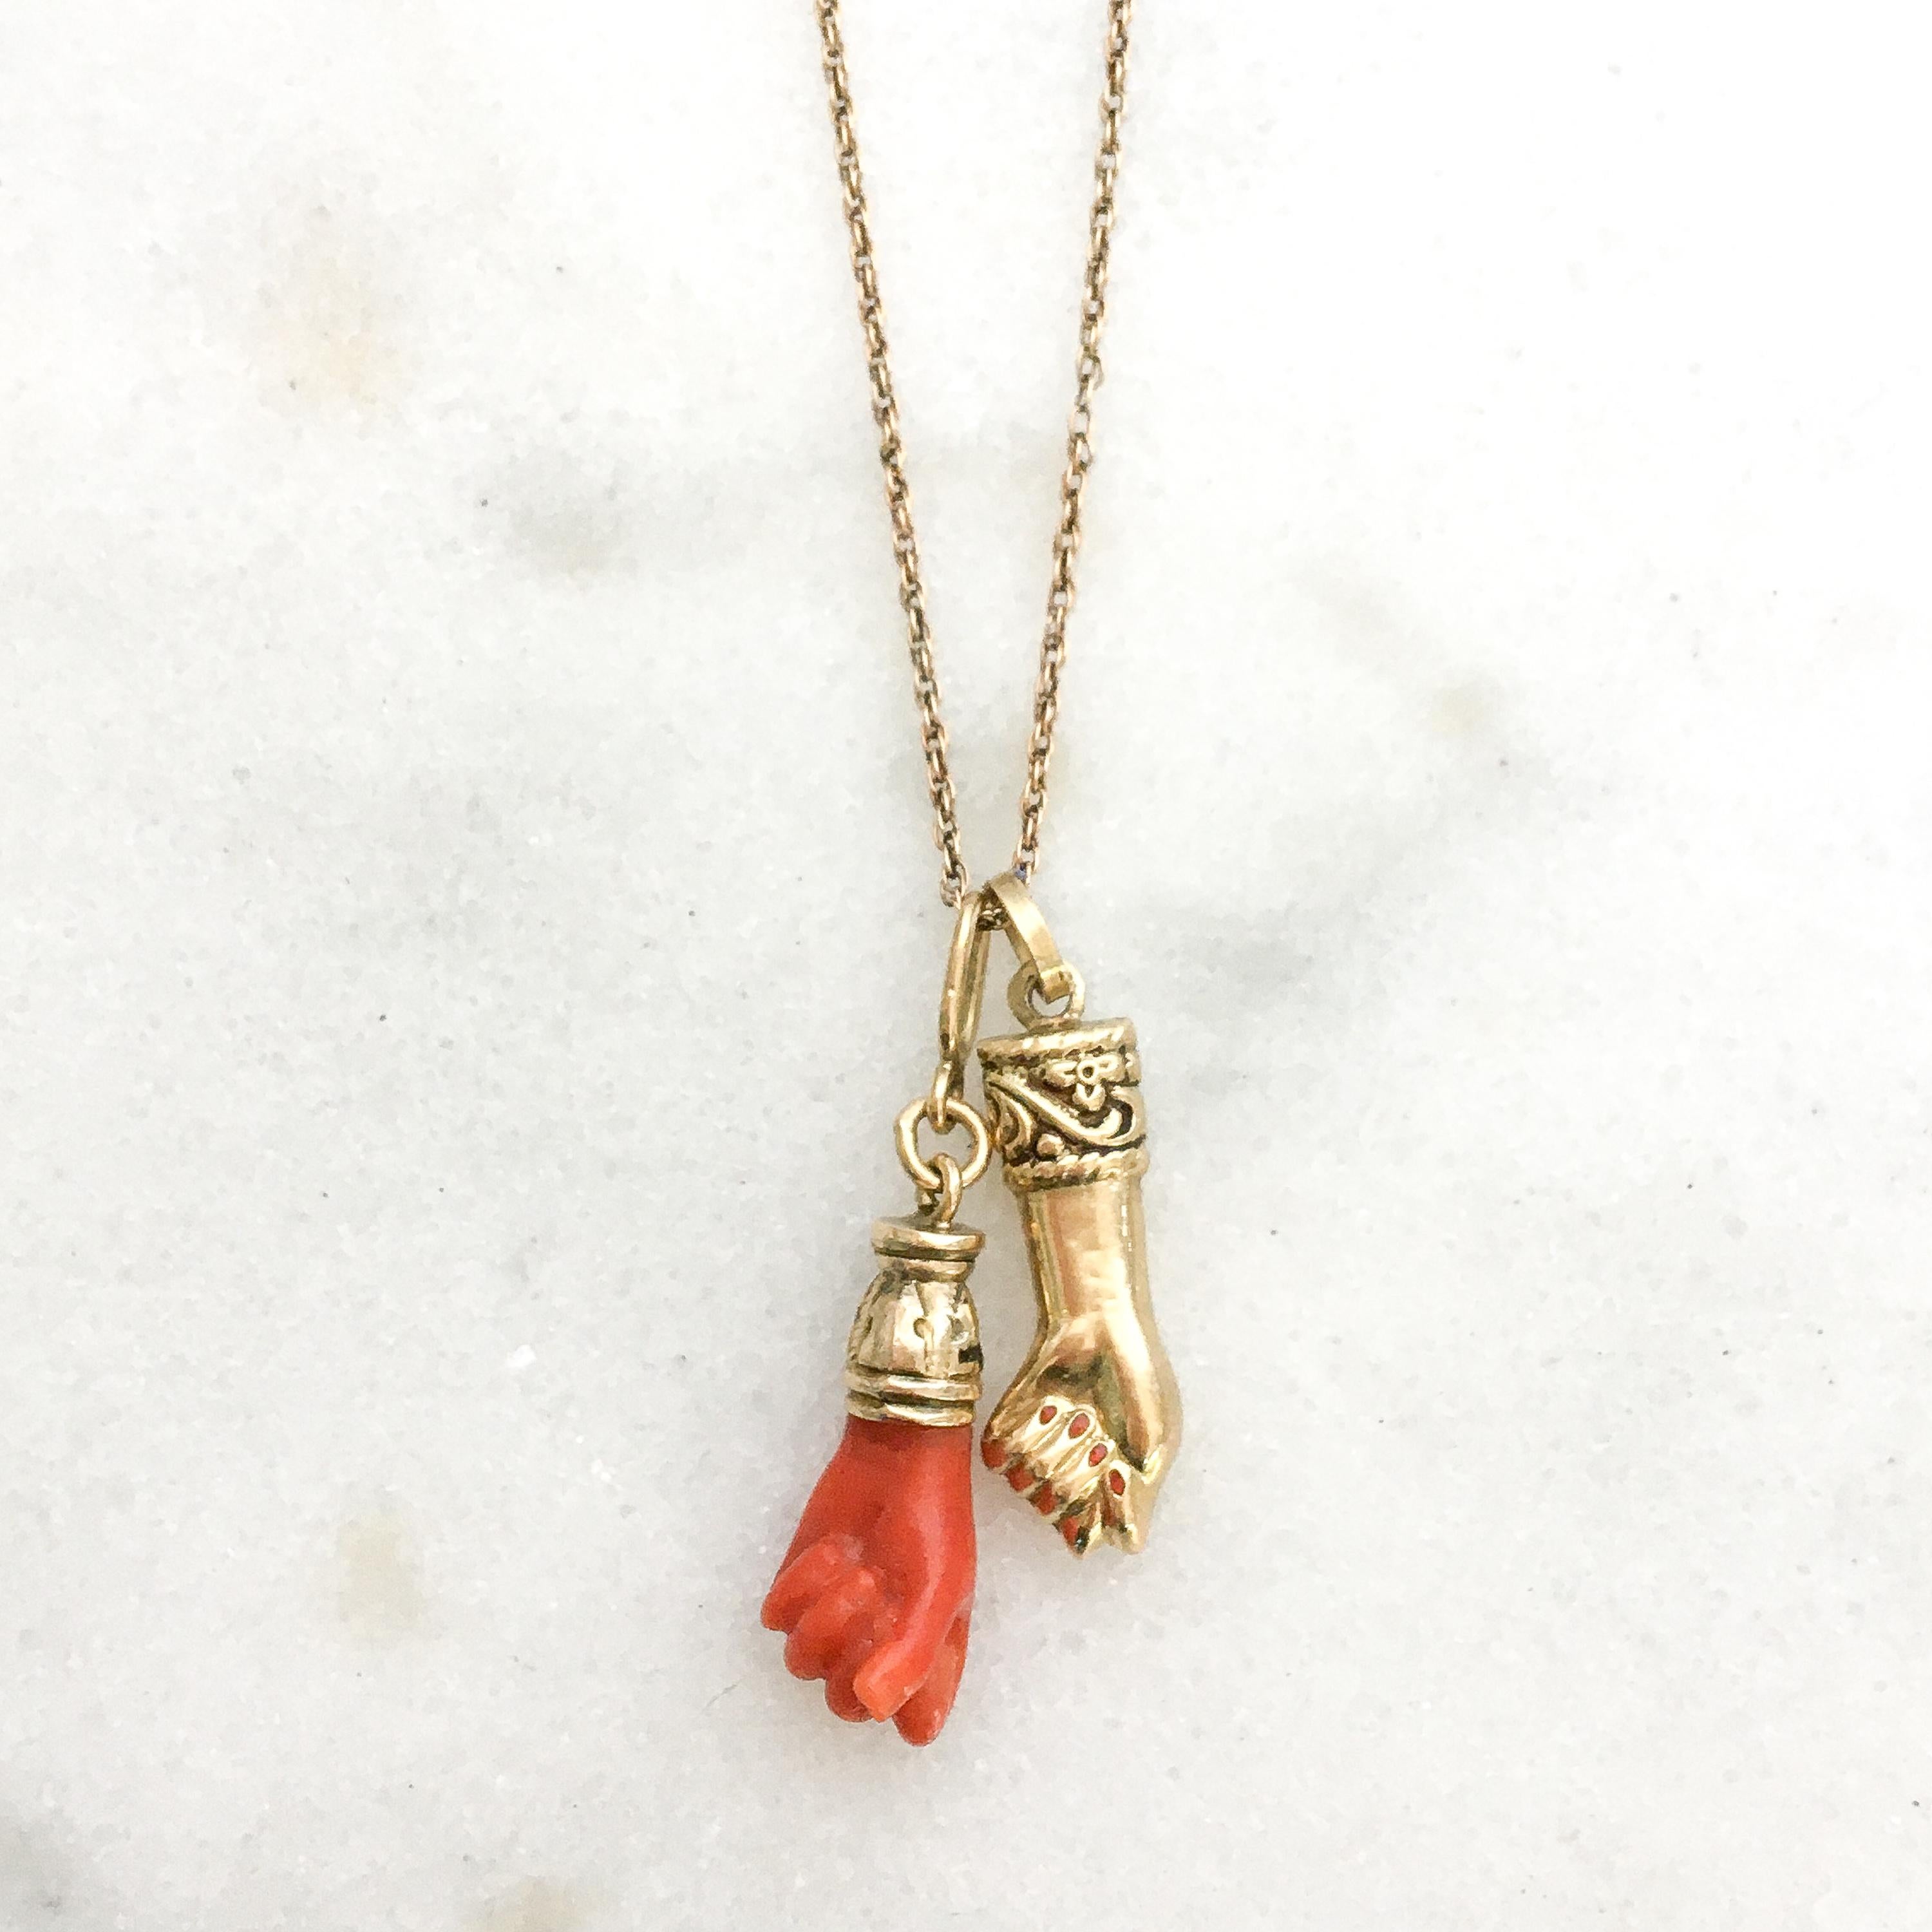 A beautiful figa hand charm made of coral and set with a 14 karat gold engraved bail. The hand is nicely detailed and the bail has beautiful engravings. The charm is great worn alone or layered with your other favorites. The charm comes without the